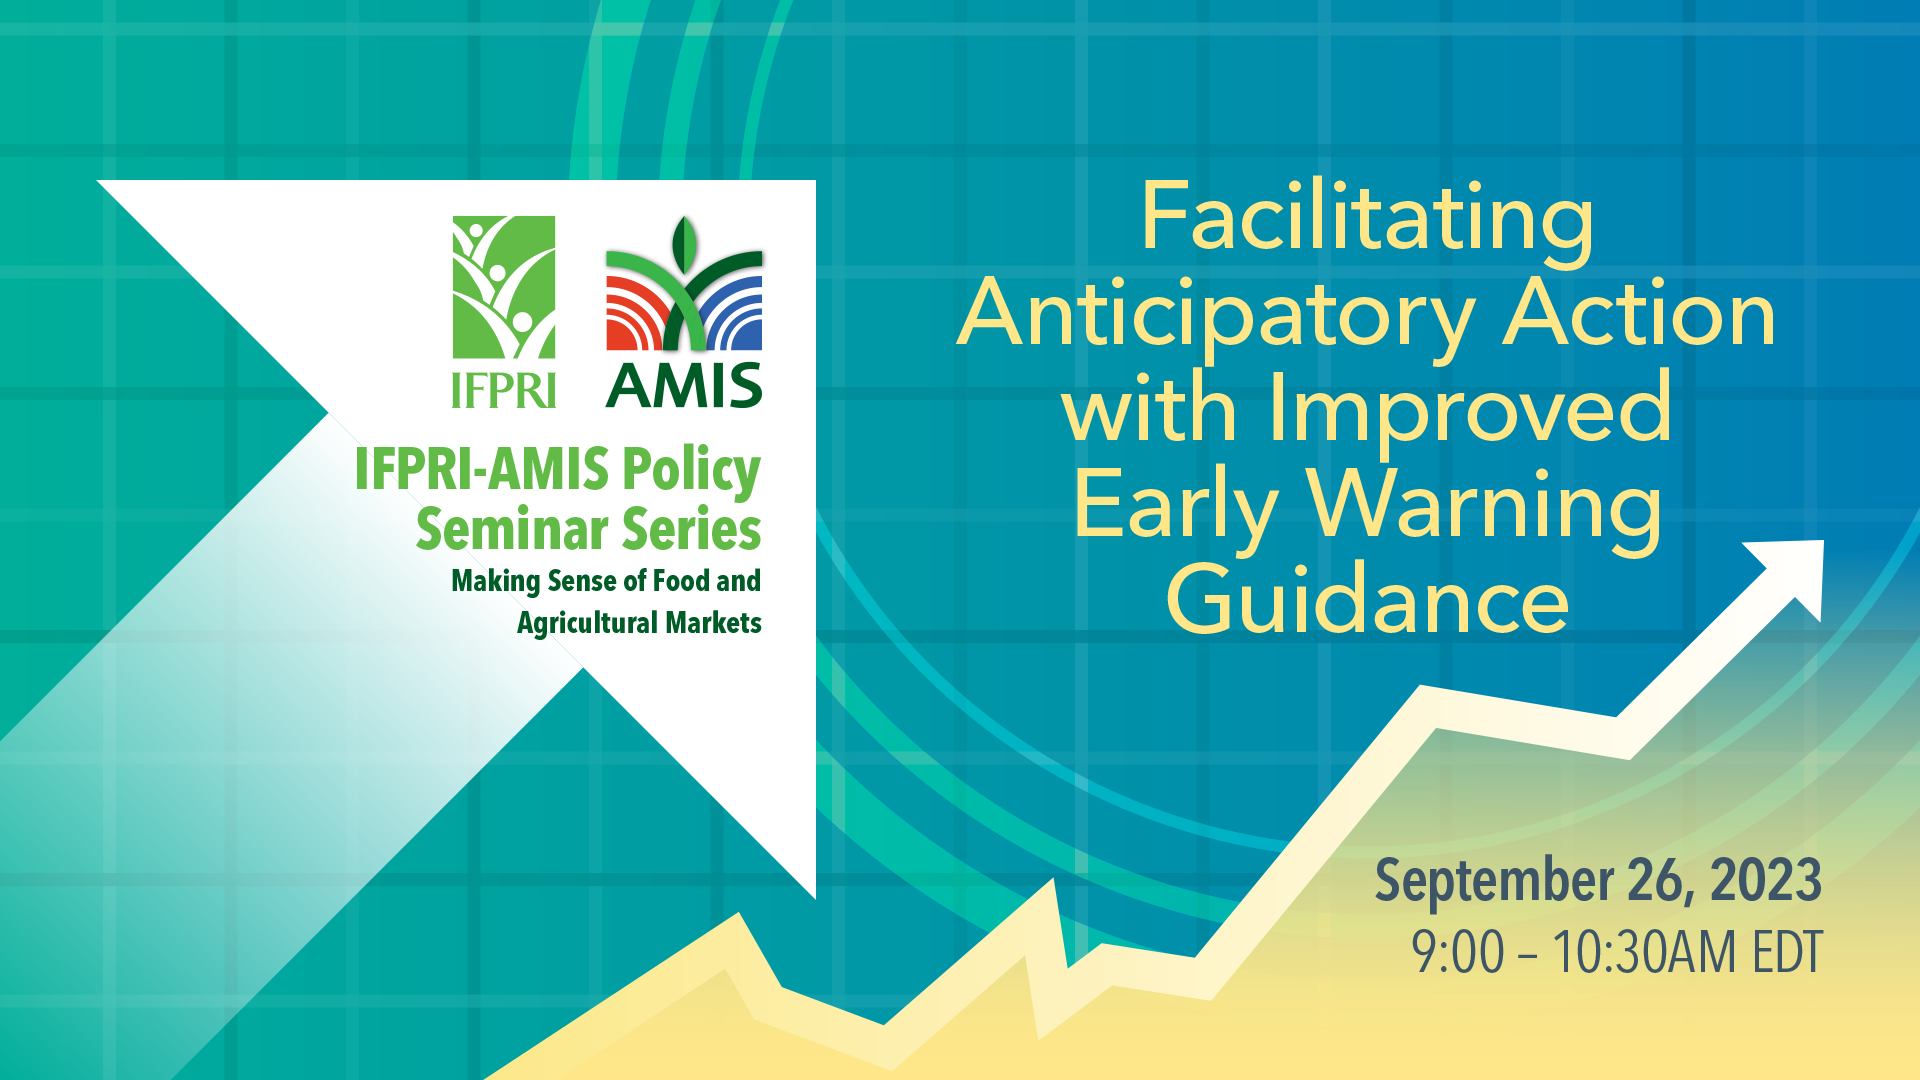 Facilitating Anticipatory Action with Improved Early Warning Guidance